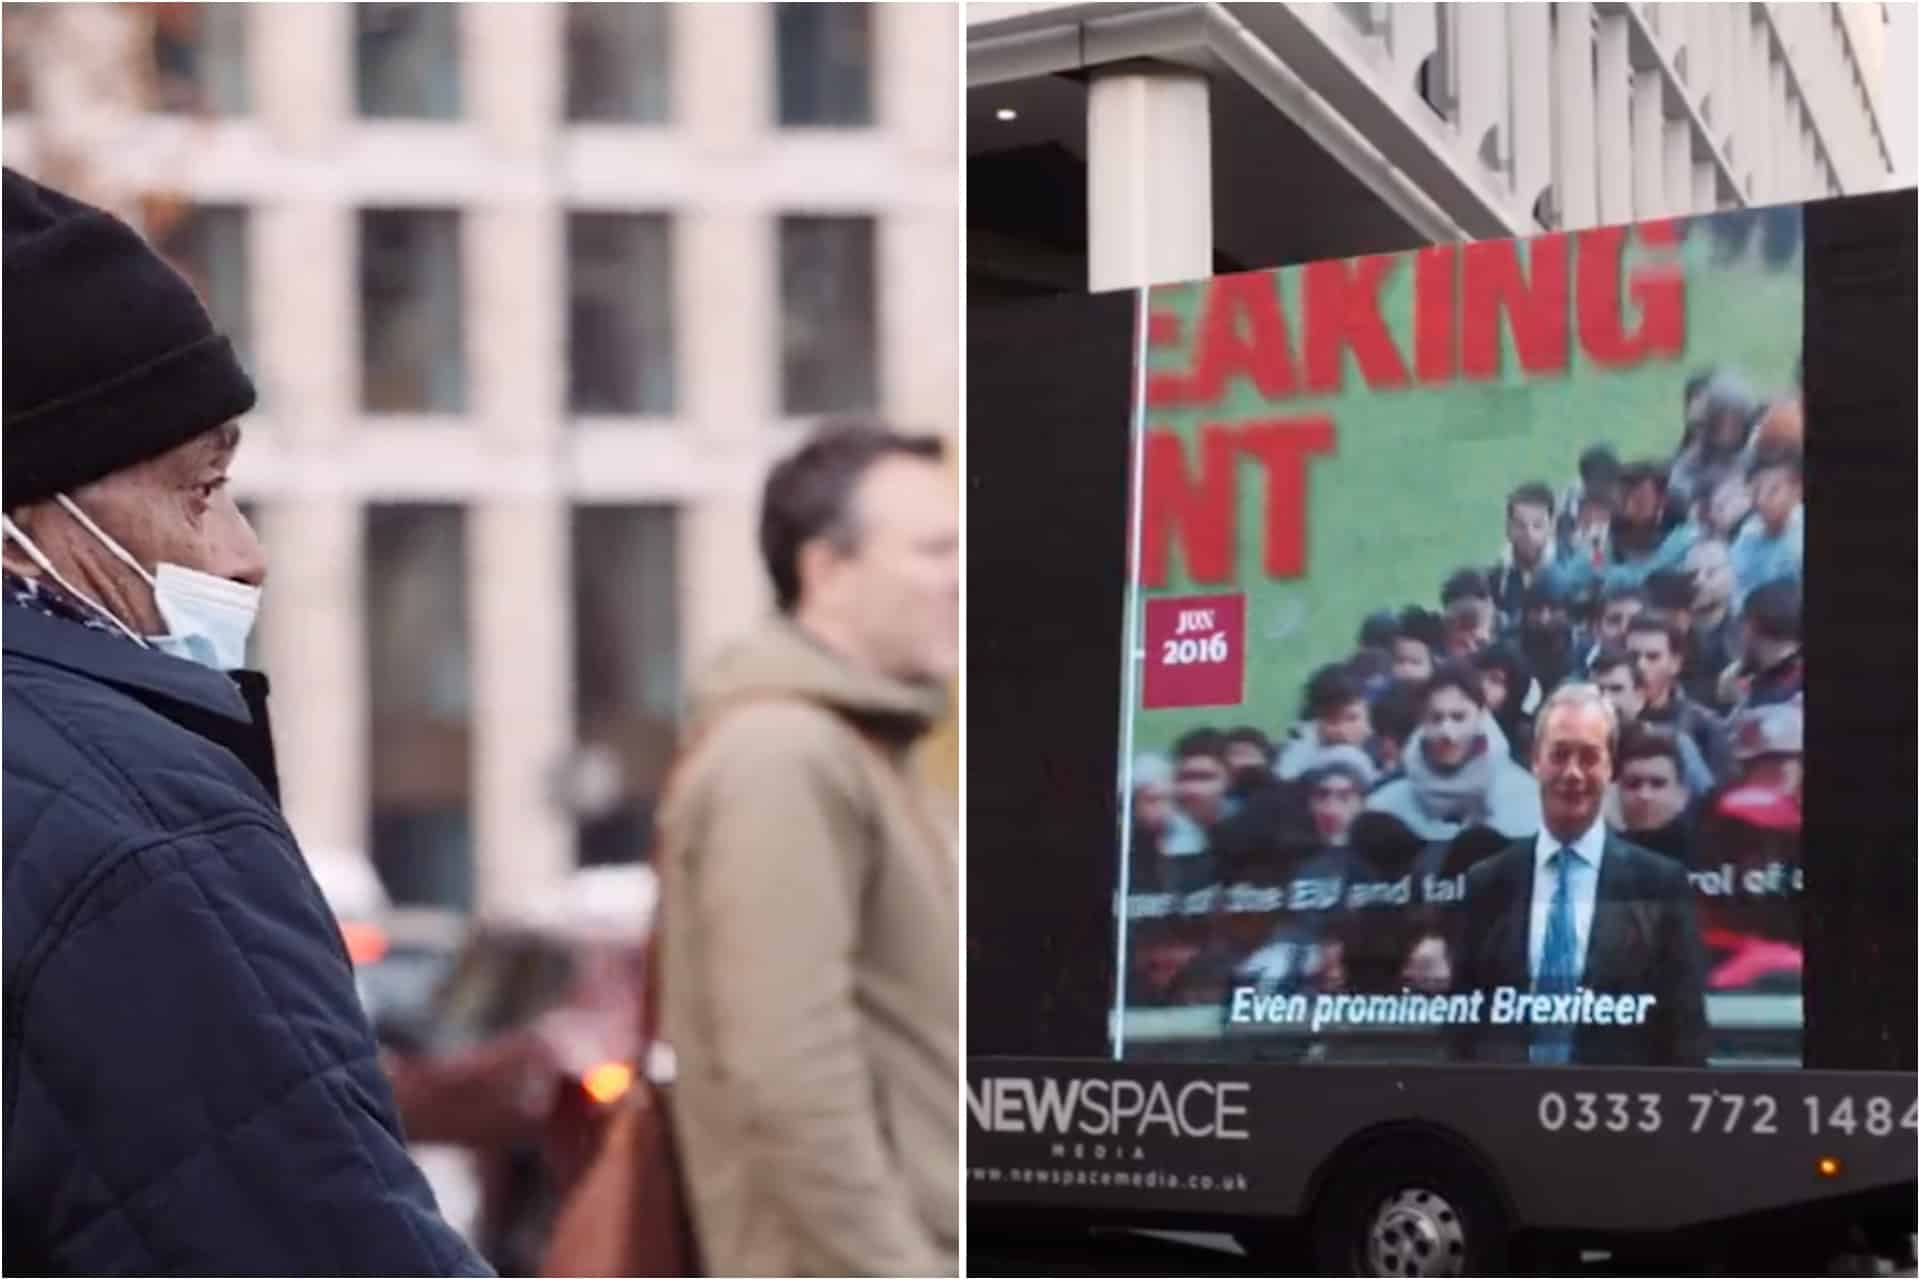 Led By Donkeys take campaign van to ITV HQ to remind them of who Farage ‘really is’